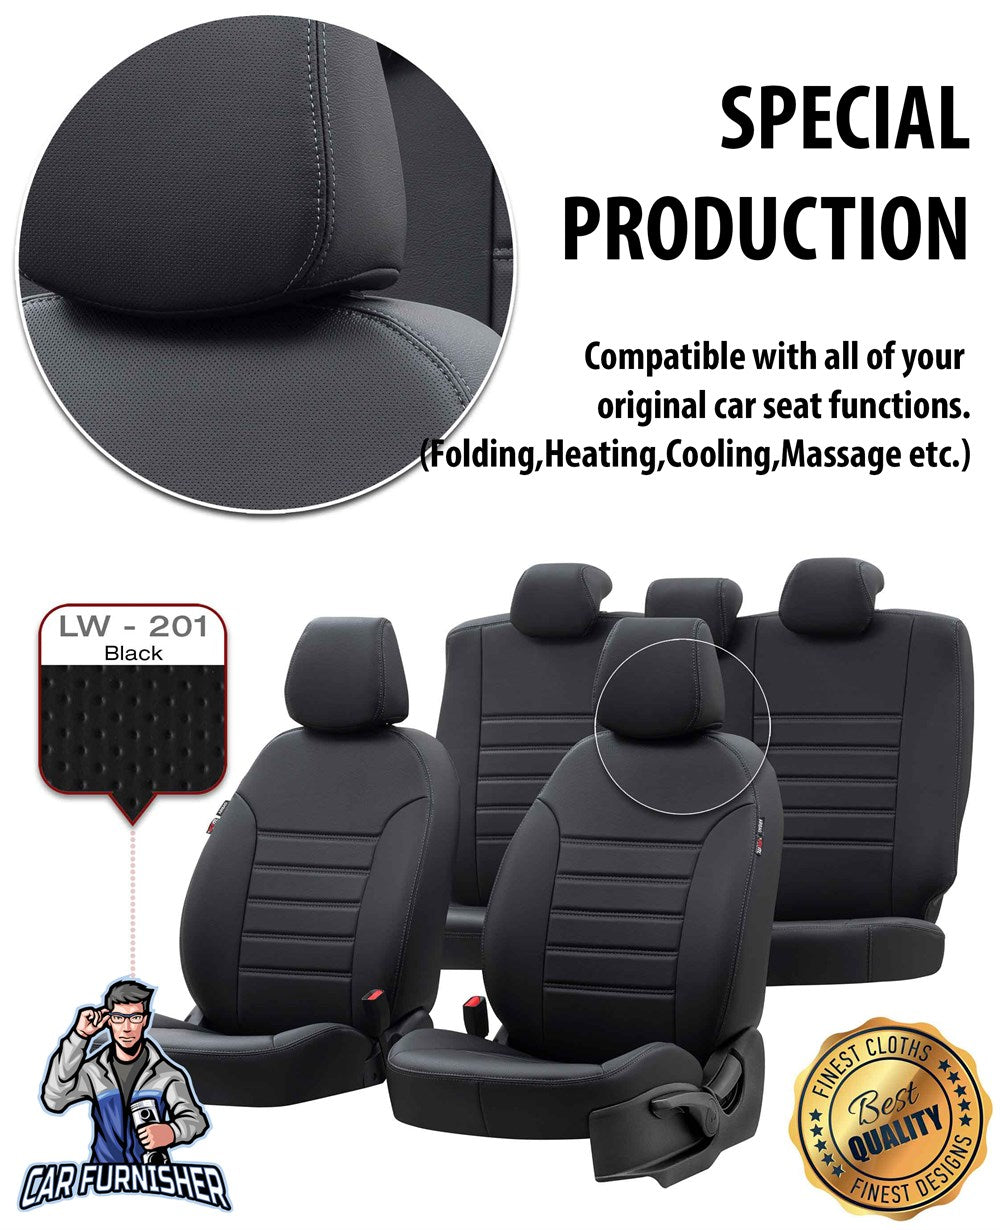 Mazda BT50 Seat Covers Istanbul Leather Design Black Leather